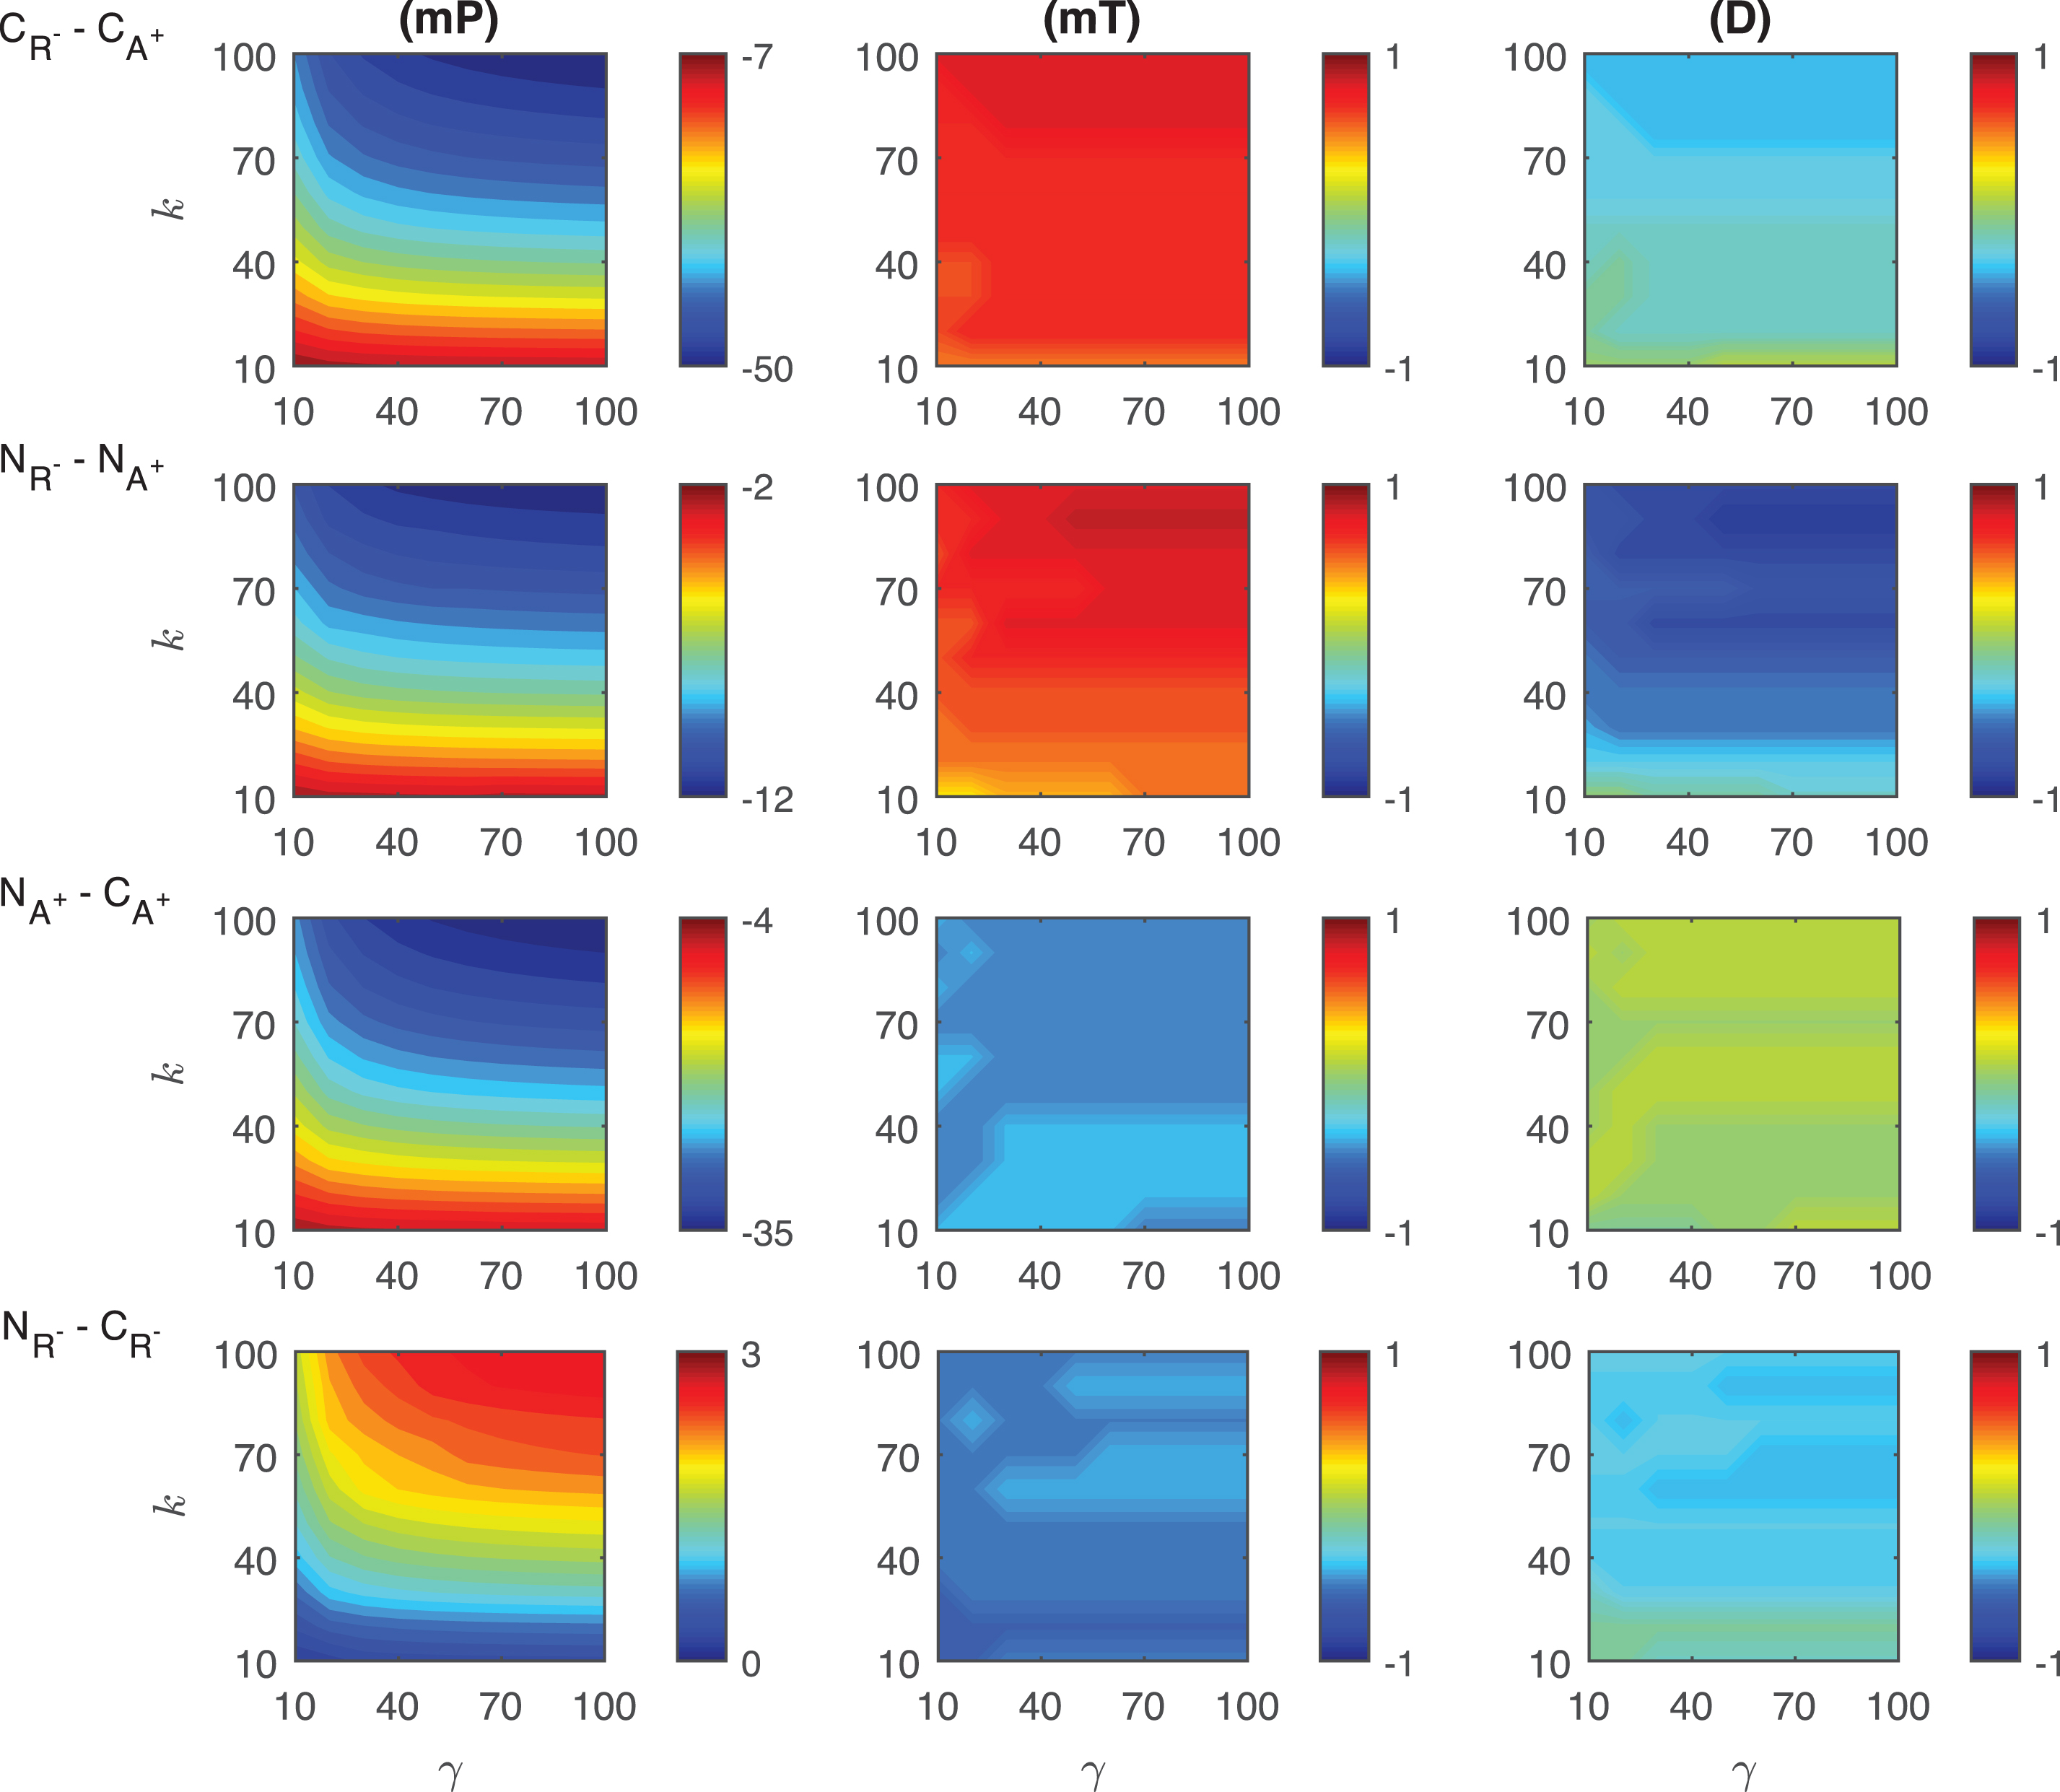 Heat maps for the comparison of the differences of three metrics (mid-protein level mP, time to reach mid-protein level mT and duration D) showing the dynamics of competitive (CA+, CR−) and noncompetitive (NA+, NR−) activation mechanisms. For all these simulations, the signal amplitude γ and persistency k are changed from 10-100 fold when ro = 0.01 while all the other parameters were kept constant at their estimated values listed in Section 3.